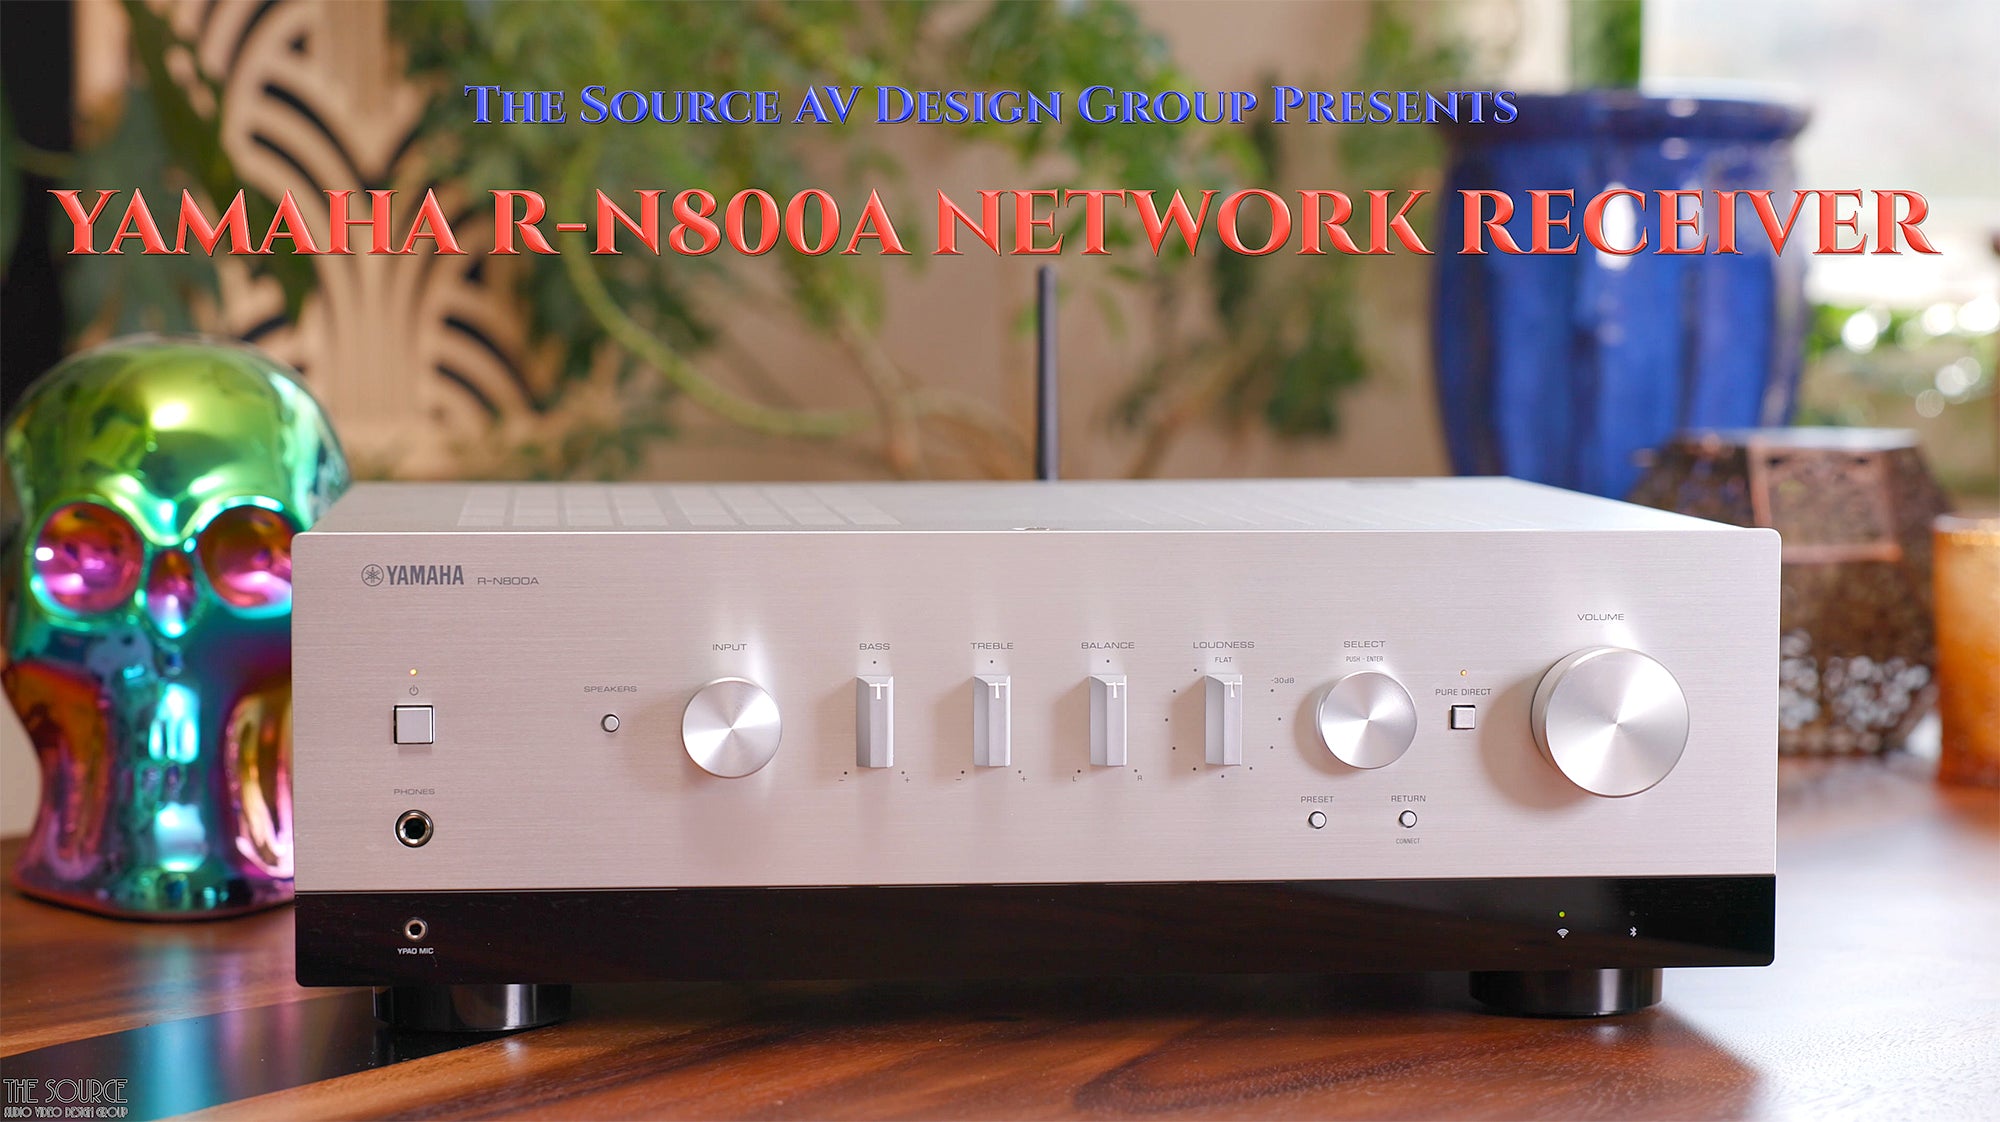 Yamaha R-N800A huge value for 2 Channel Music listening!